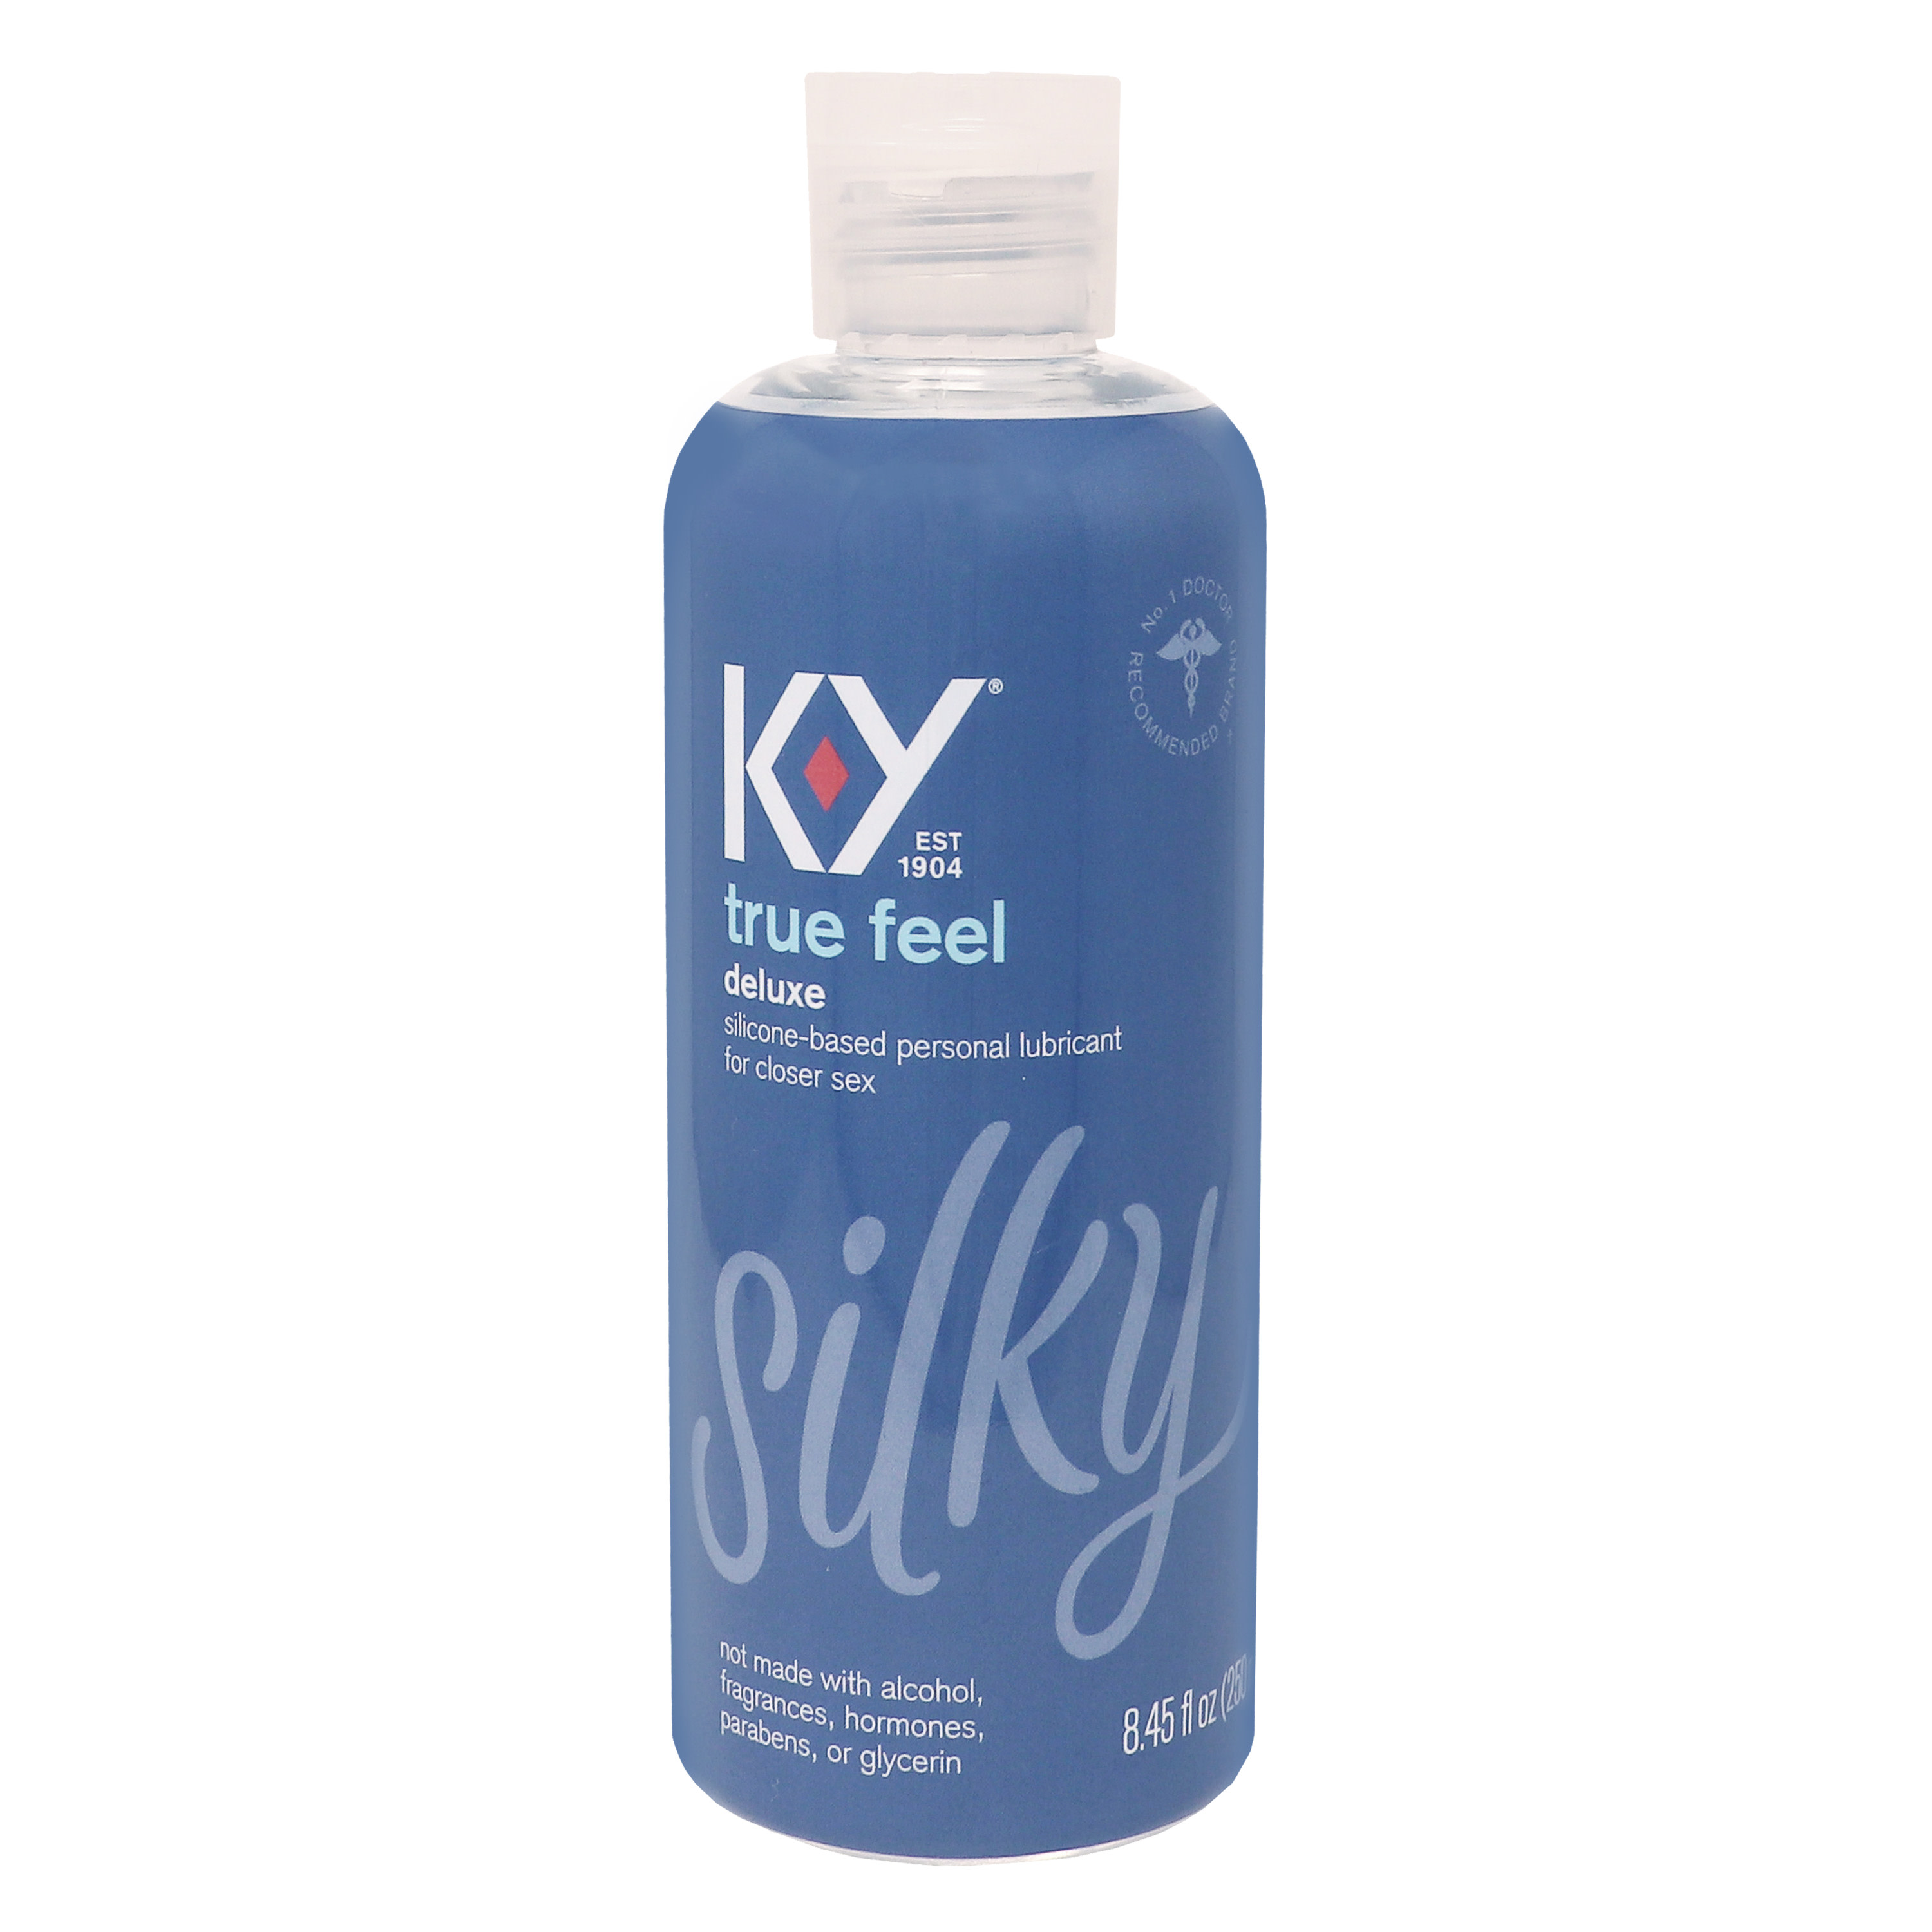 KY True Feel Deluxe Personal Lubricant